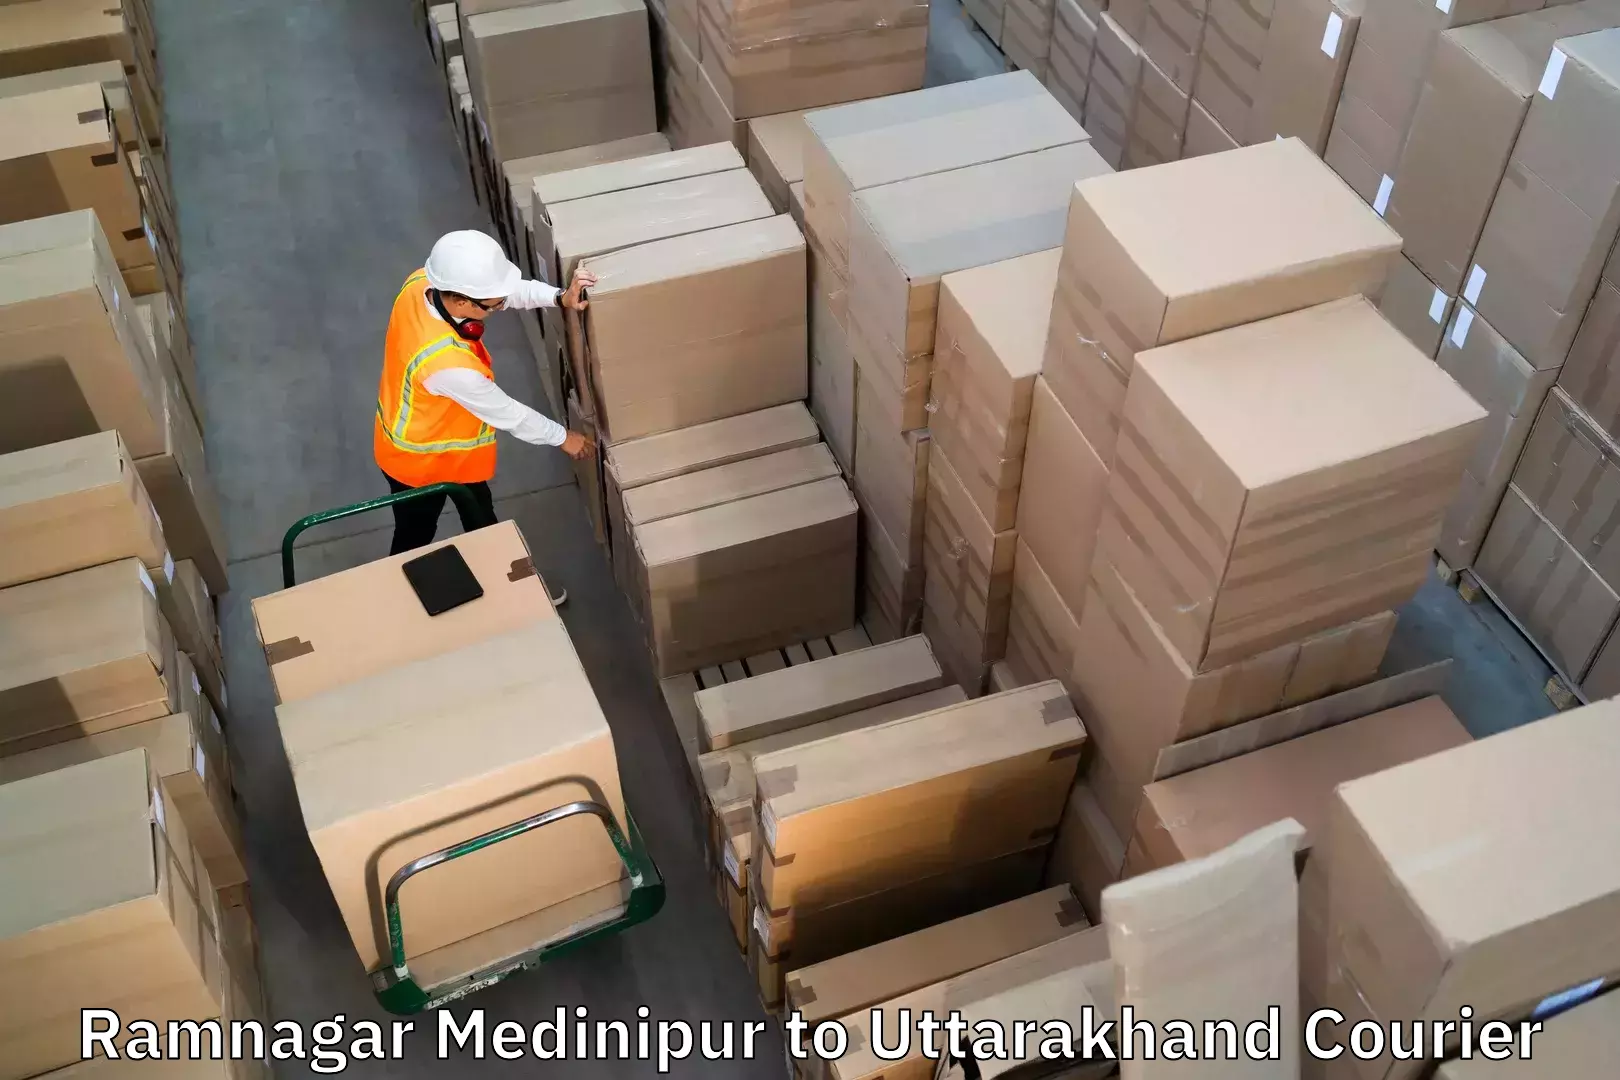 Baggage delivery scheduling Ramnagar Medinipur to Didihat